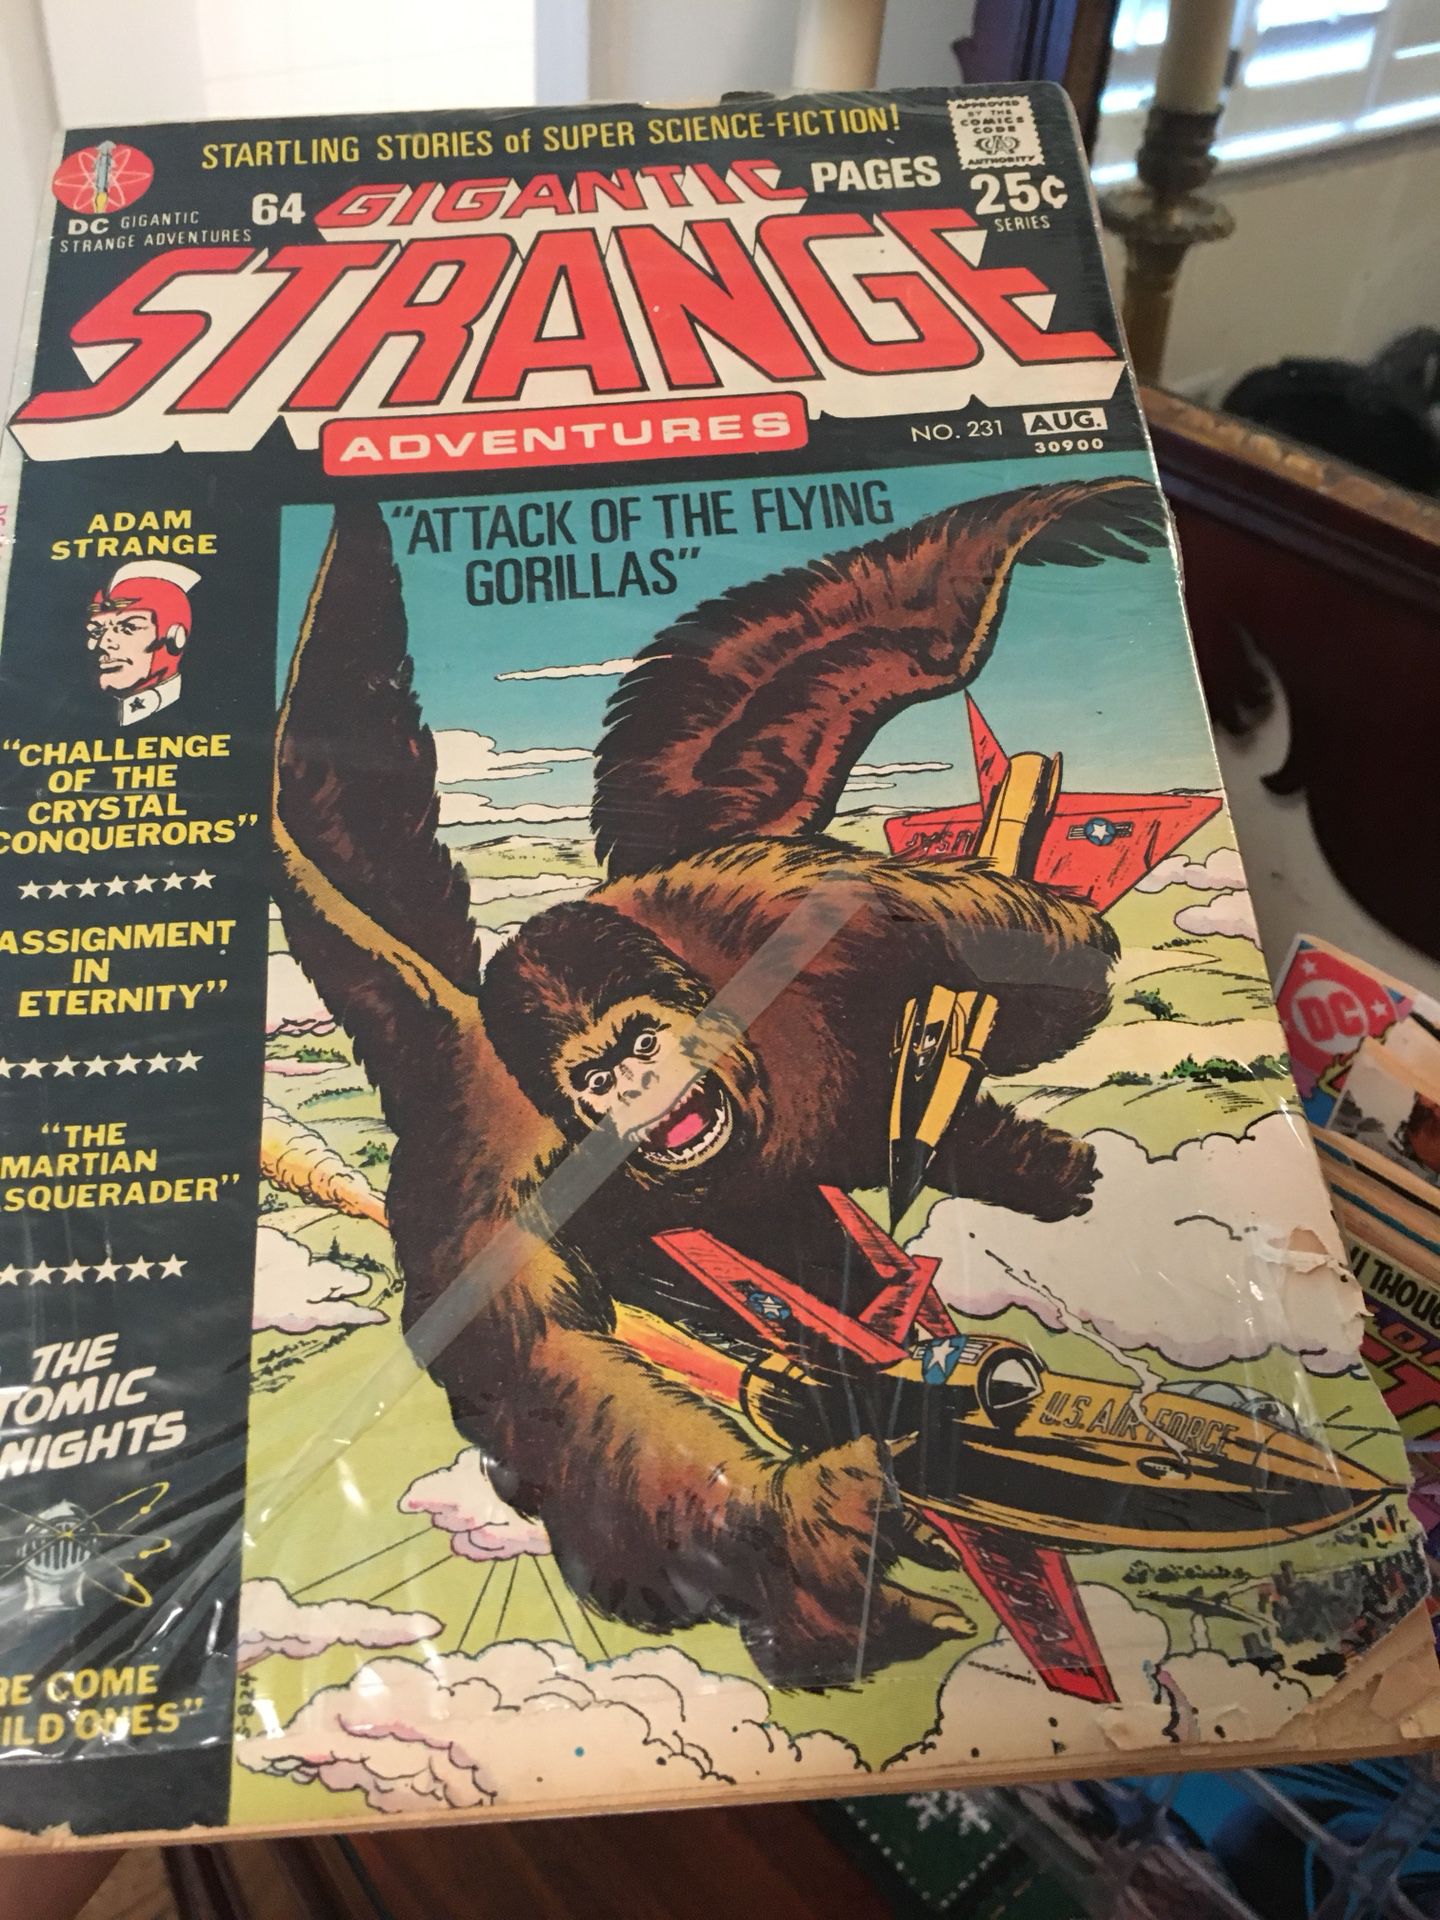 Gigantic Strange Comic-good used condition behind plastic covering with small tear in corner (see pics)